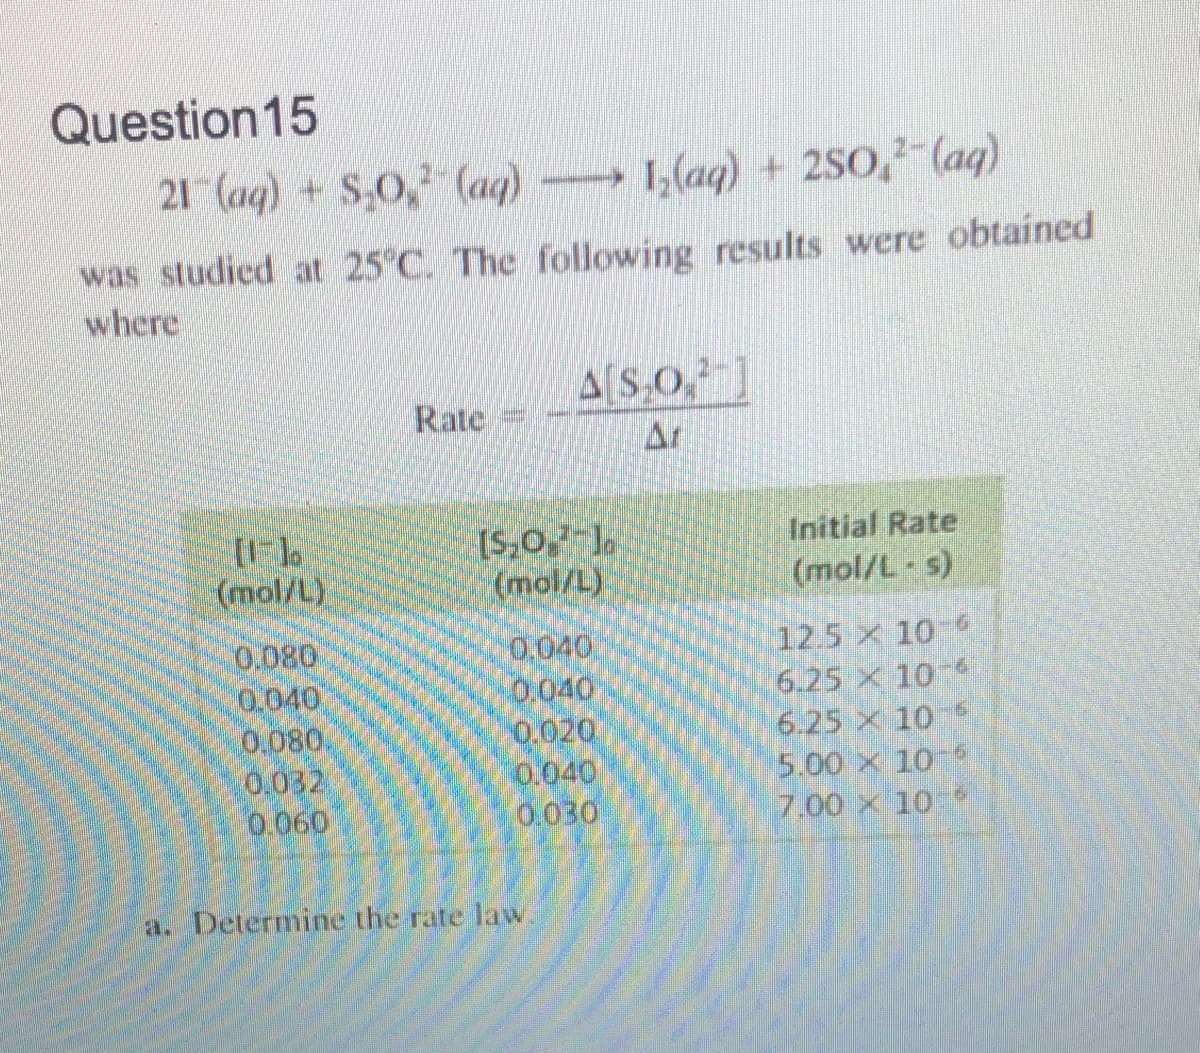 Question 15
21 (aq) + S,0, (aq) 1,(aq) + 2S0, (aq)
was studied at 25°C. The following results were obtained
where
A[S O,]
Rate
Ar
Initial Rate
(mol/L s)
(mol/L)
(mol/L)
0.080
0.040
0.080
0,032
0.060
0,040,
0:040
0.020
0.040
0.030
12.5 x 10
6.25 x 10
6.25 x 10
5.00 x 10-
7.00 x 10
a. Determine the rate law
